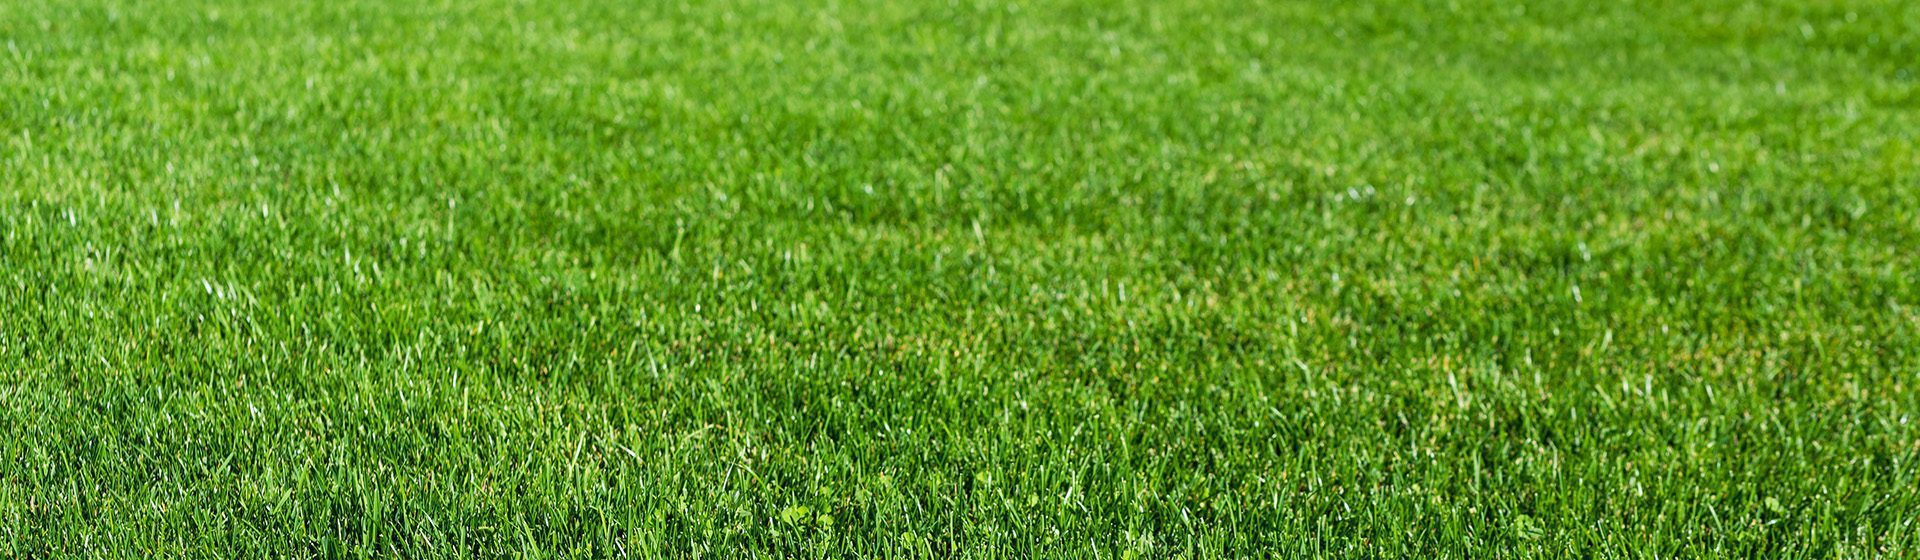 Why Artificial Grass Lawns are the Next Best Thing